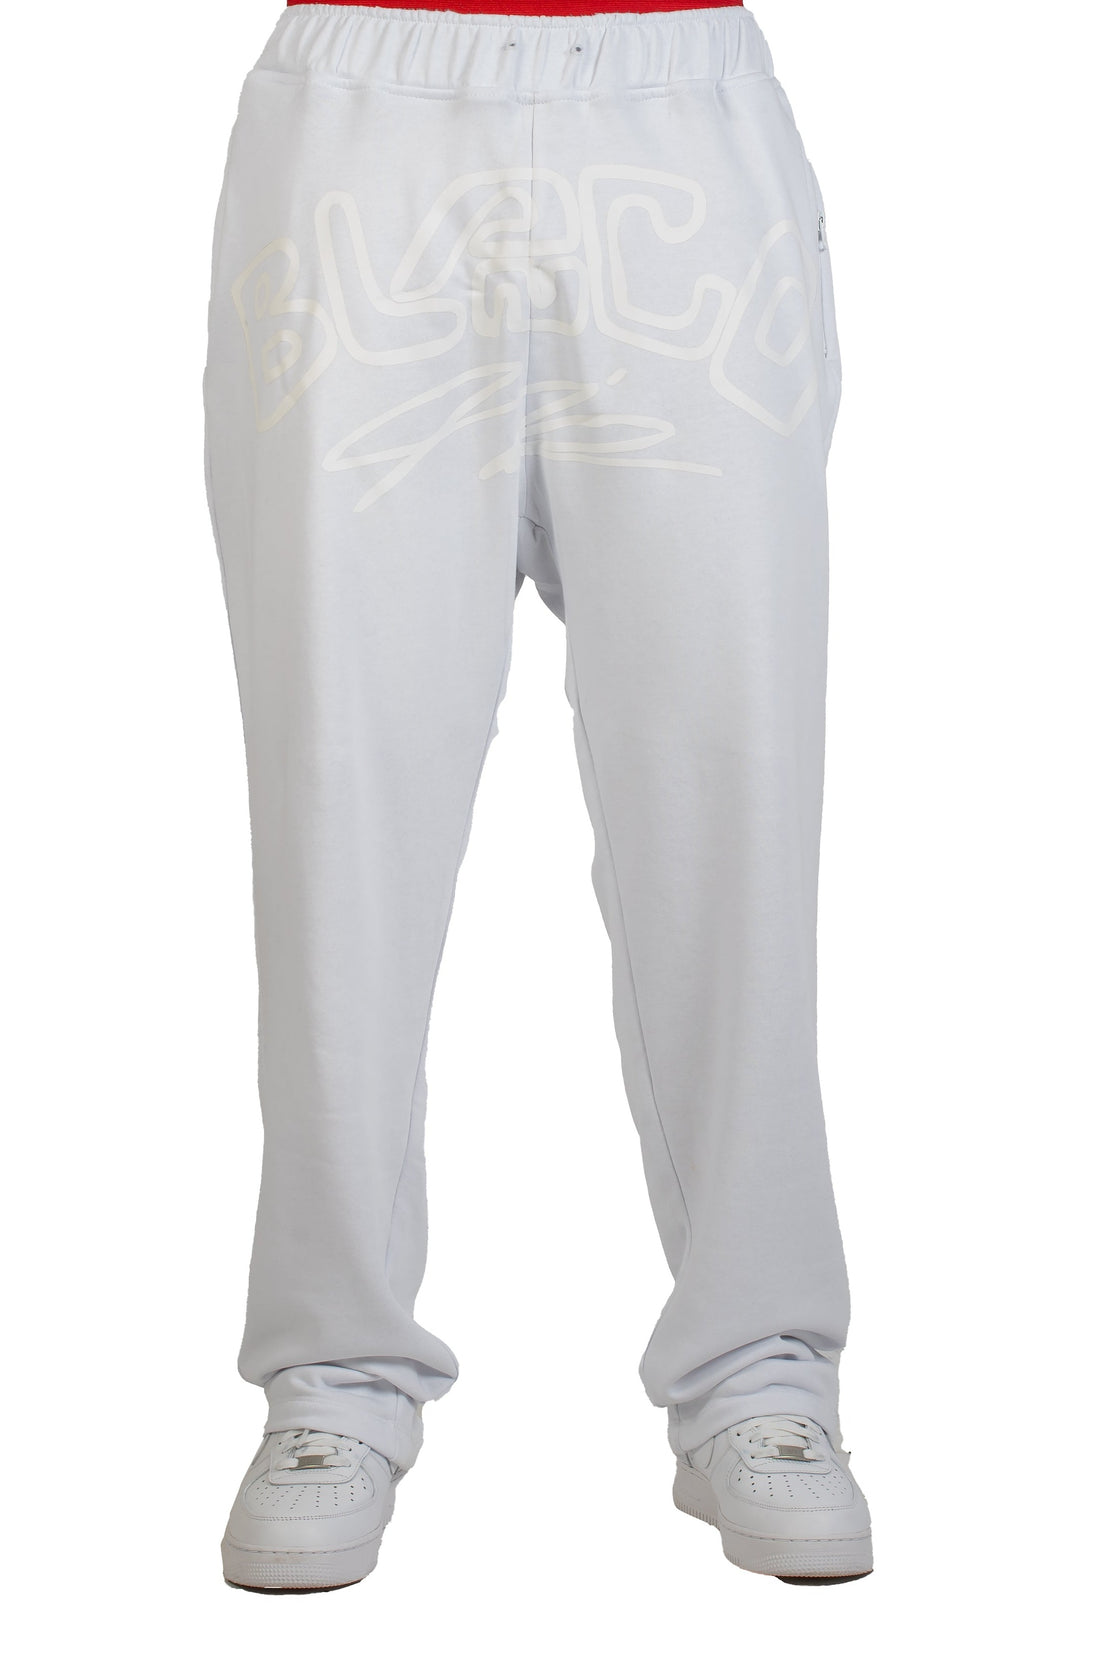 Summer White Sweatpants Mens Fashion Simple Solid Color Lace Up Slacks Foot  Pants And Trousers